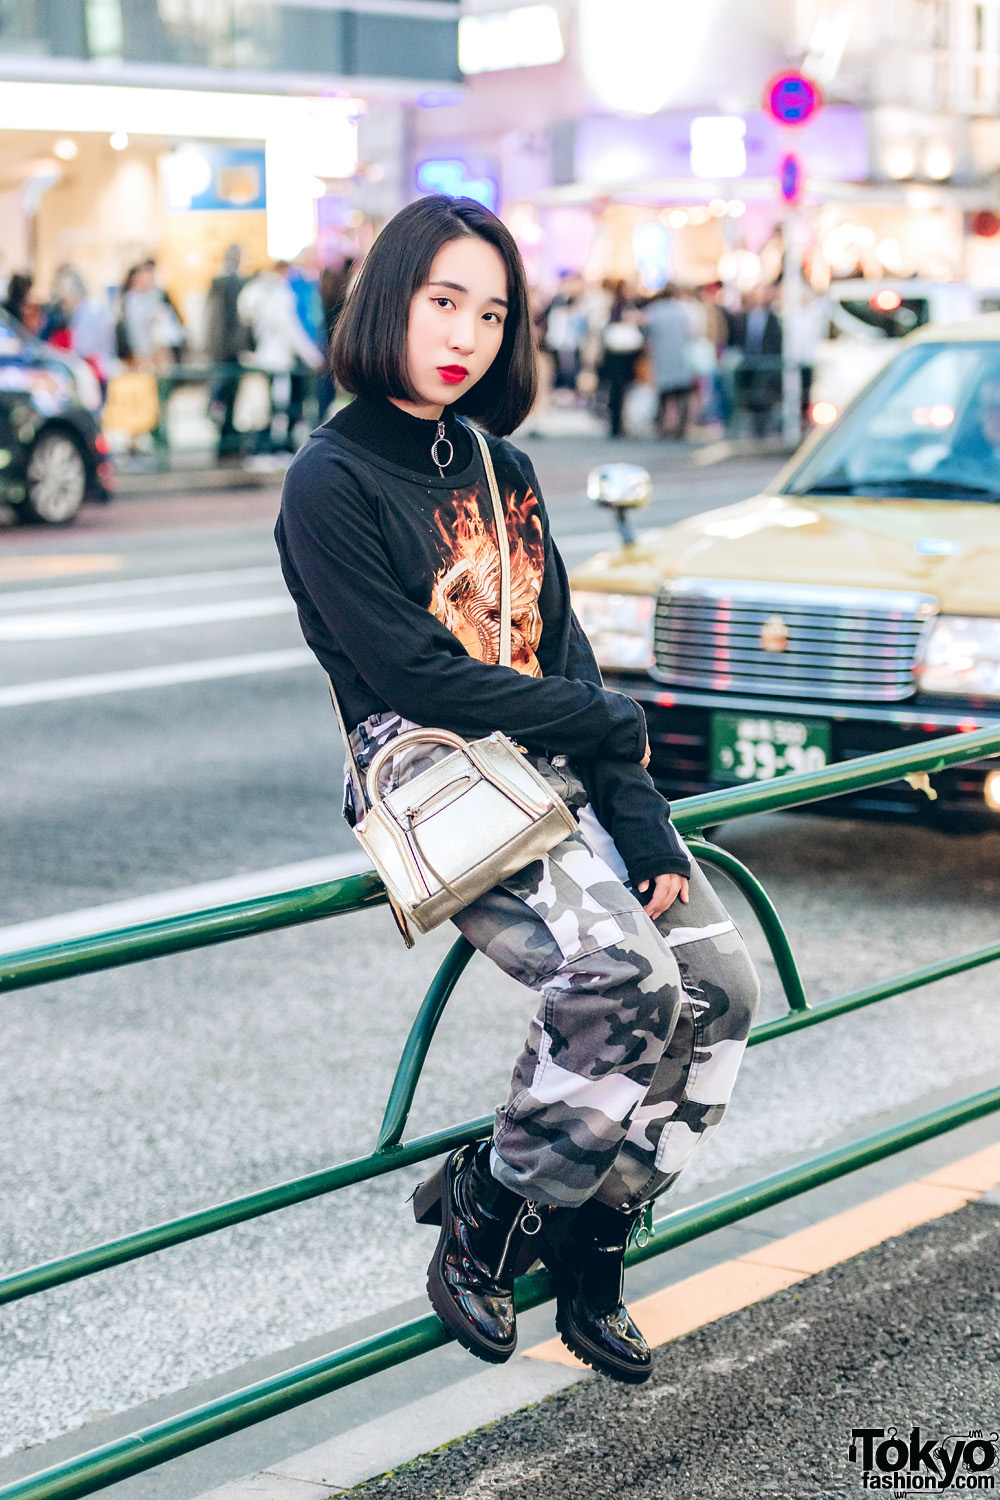 Tough-Chic Streetwear w/ Graphic Sweatshirt, Camouflage Pants & Black Leather Boots